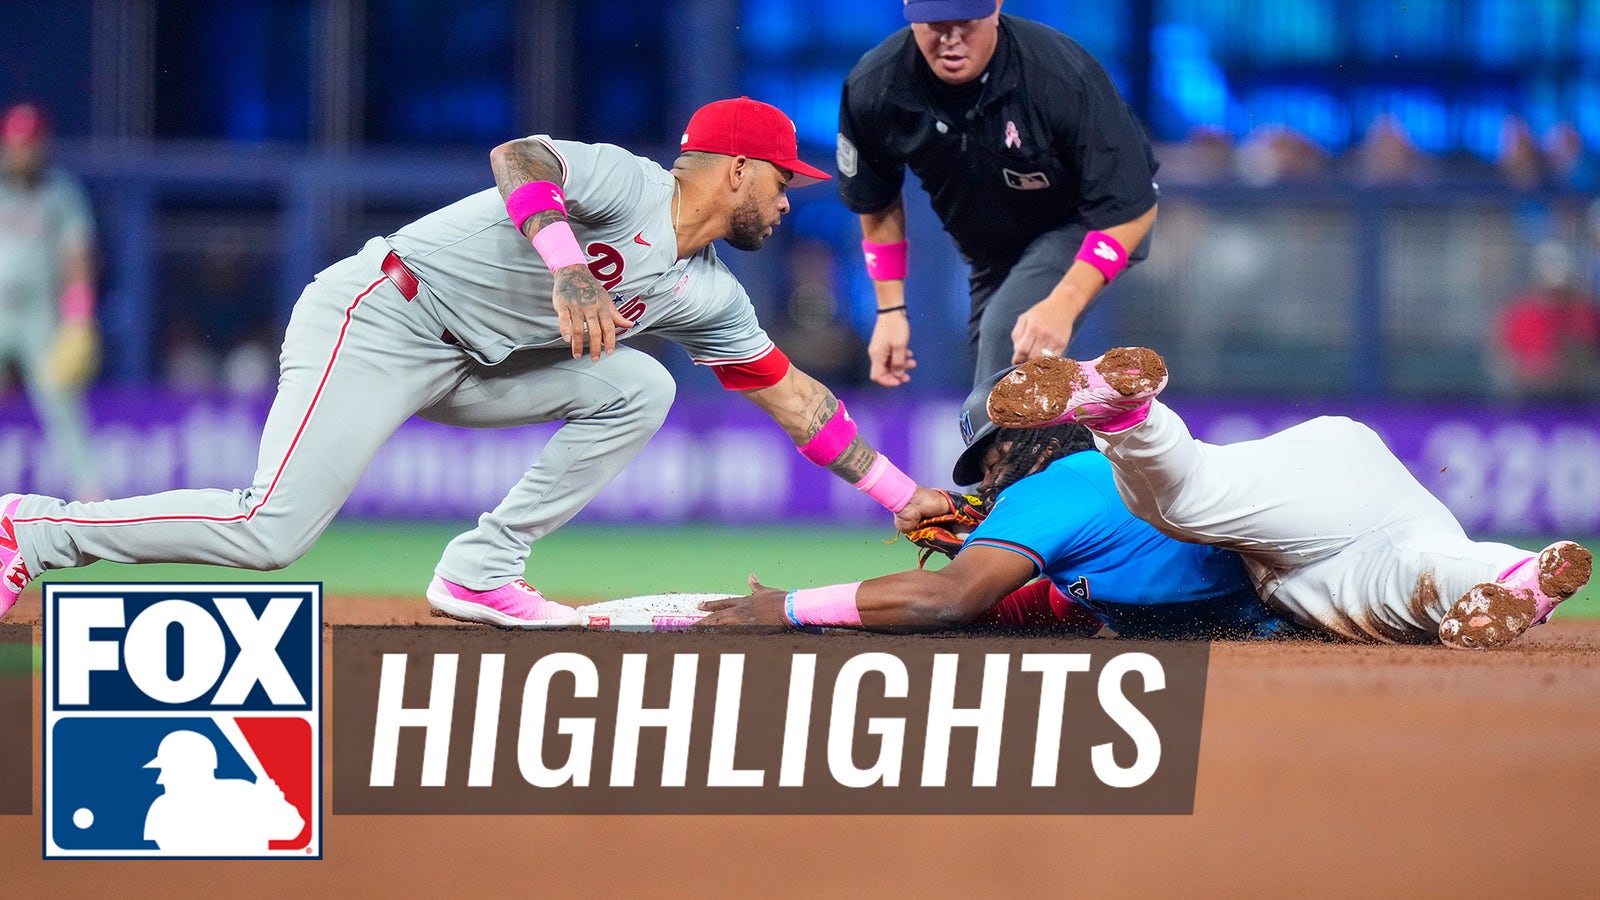 Highlights from the Marlins' walk-off win vs. Phillies